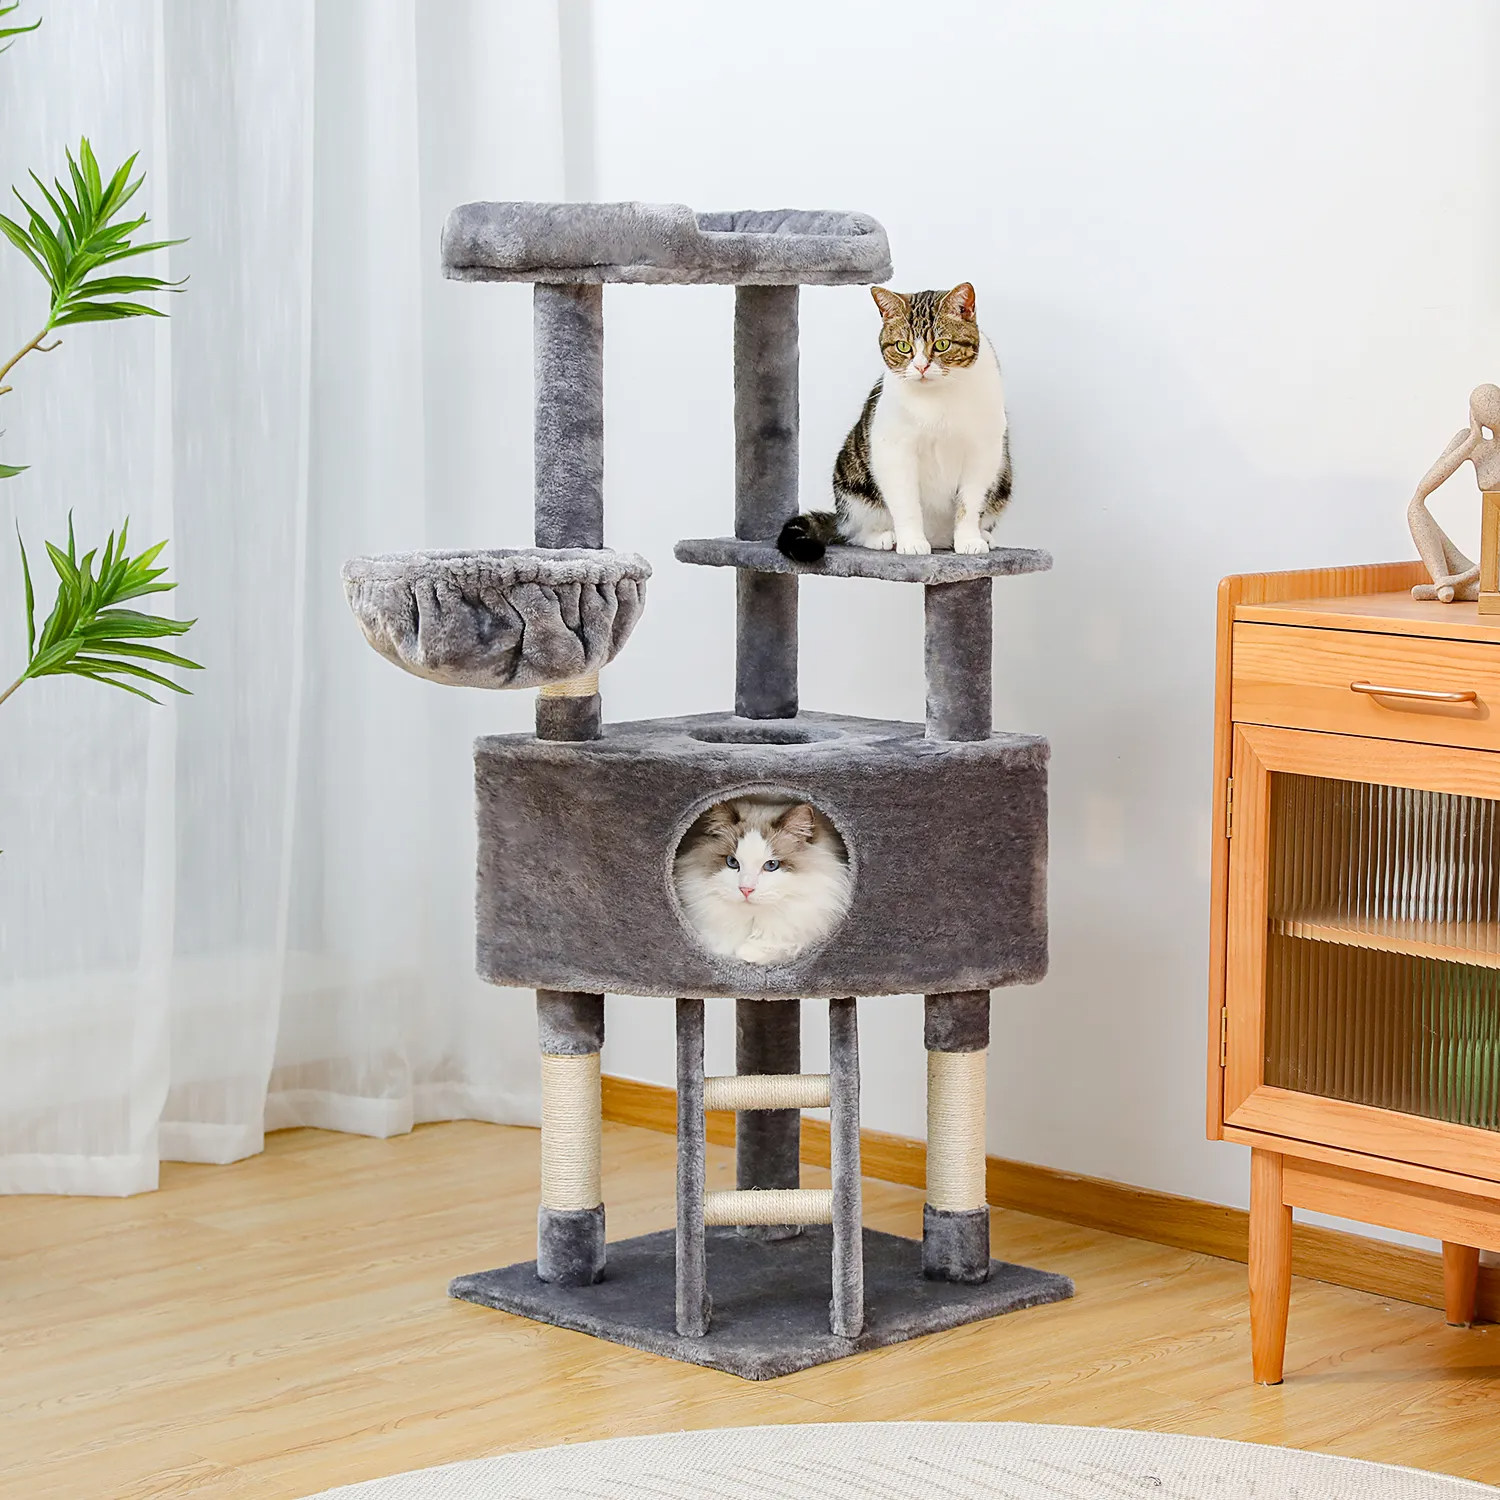 H120CM Cat Tree Condo for Indoor Self Grooming Brush Sisal Scratching Post Soft Perch House and Hanging Ball Toy Cozy Hummock